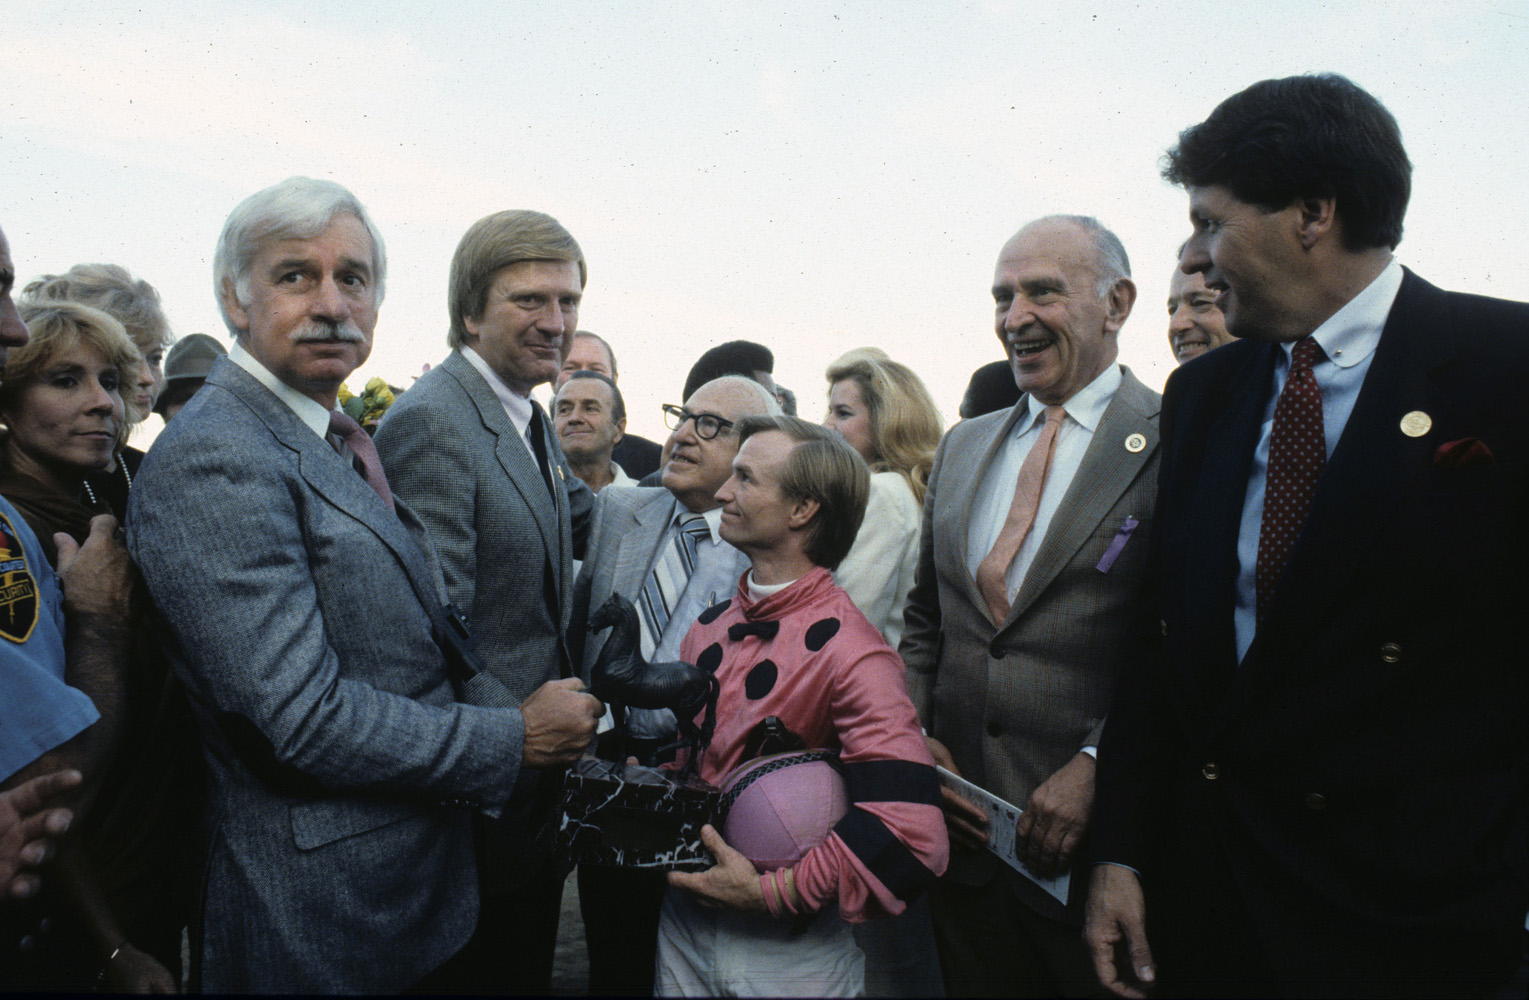 John Gaines and the winning connections of Wild Again, winner of the 1984 Breeders' Cup Classic (Breeders' Cup Photo)